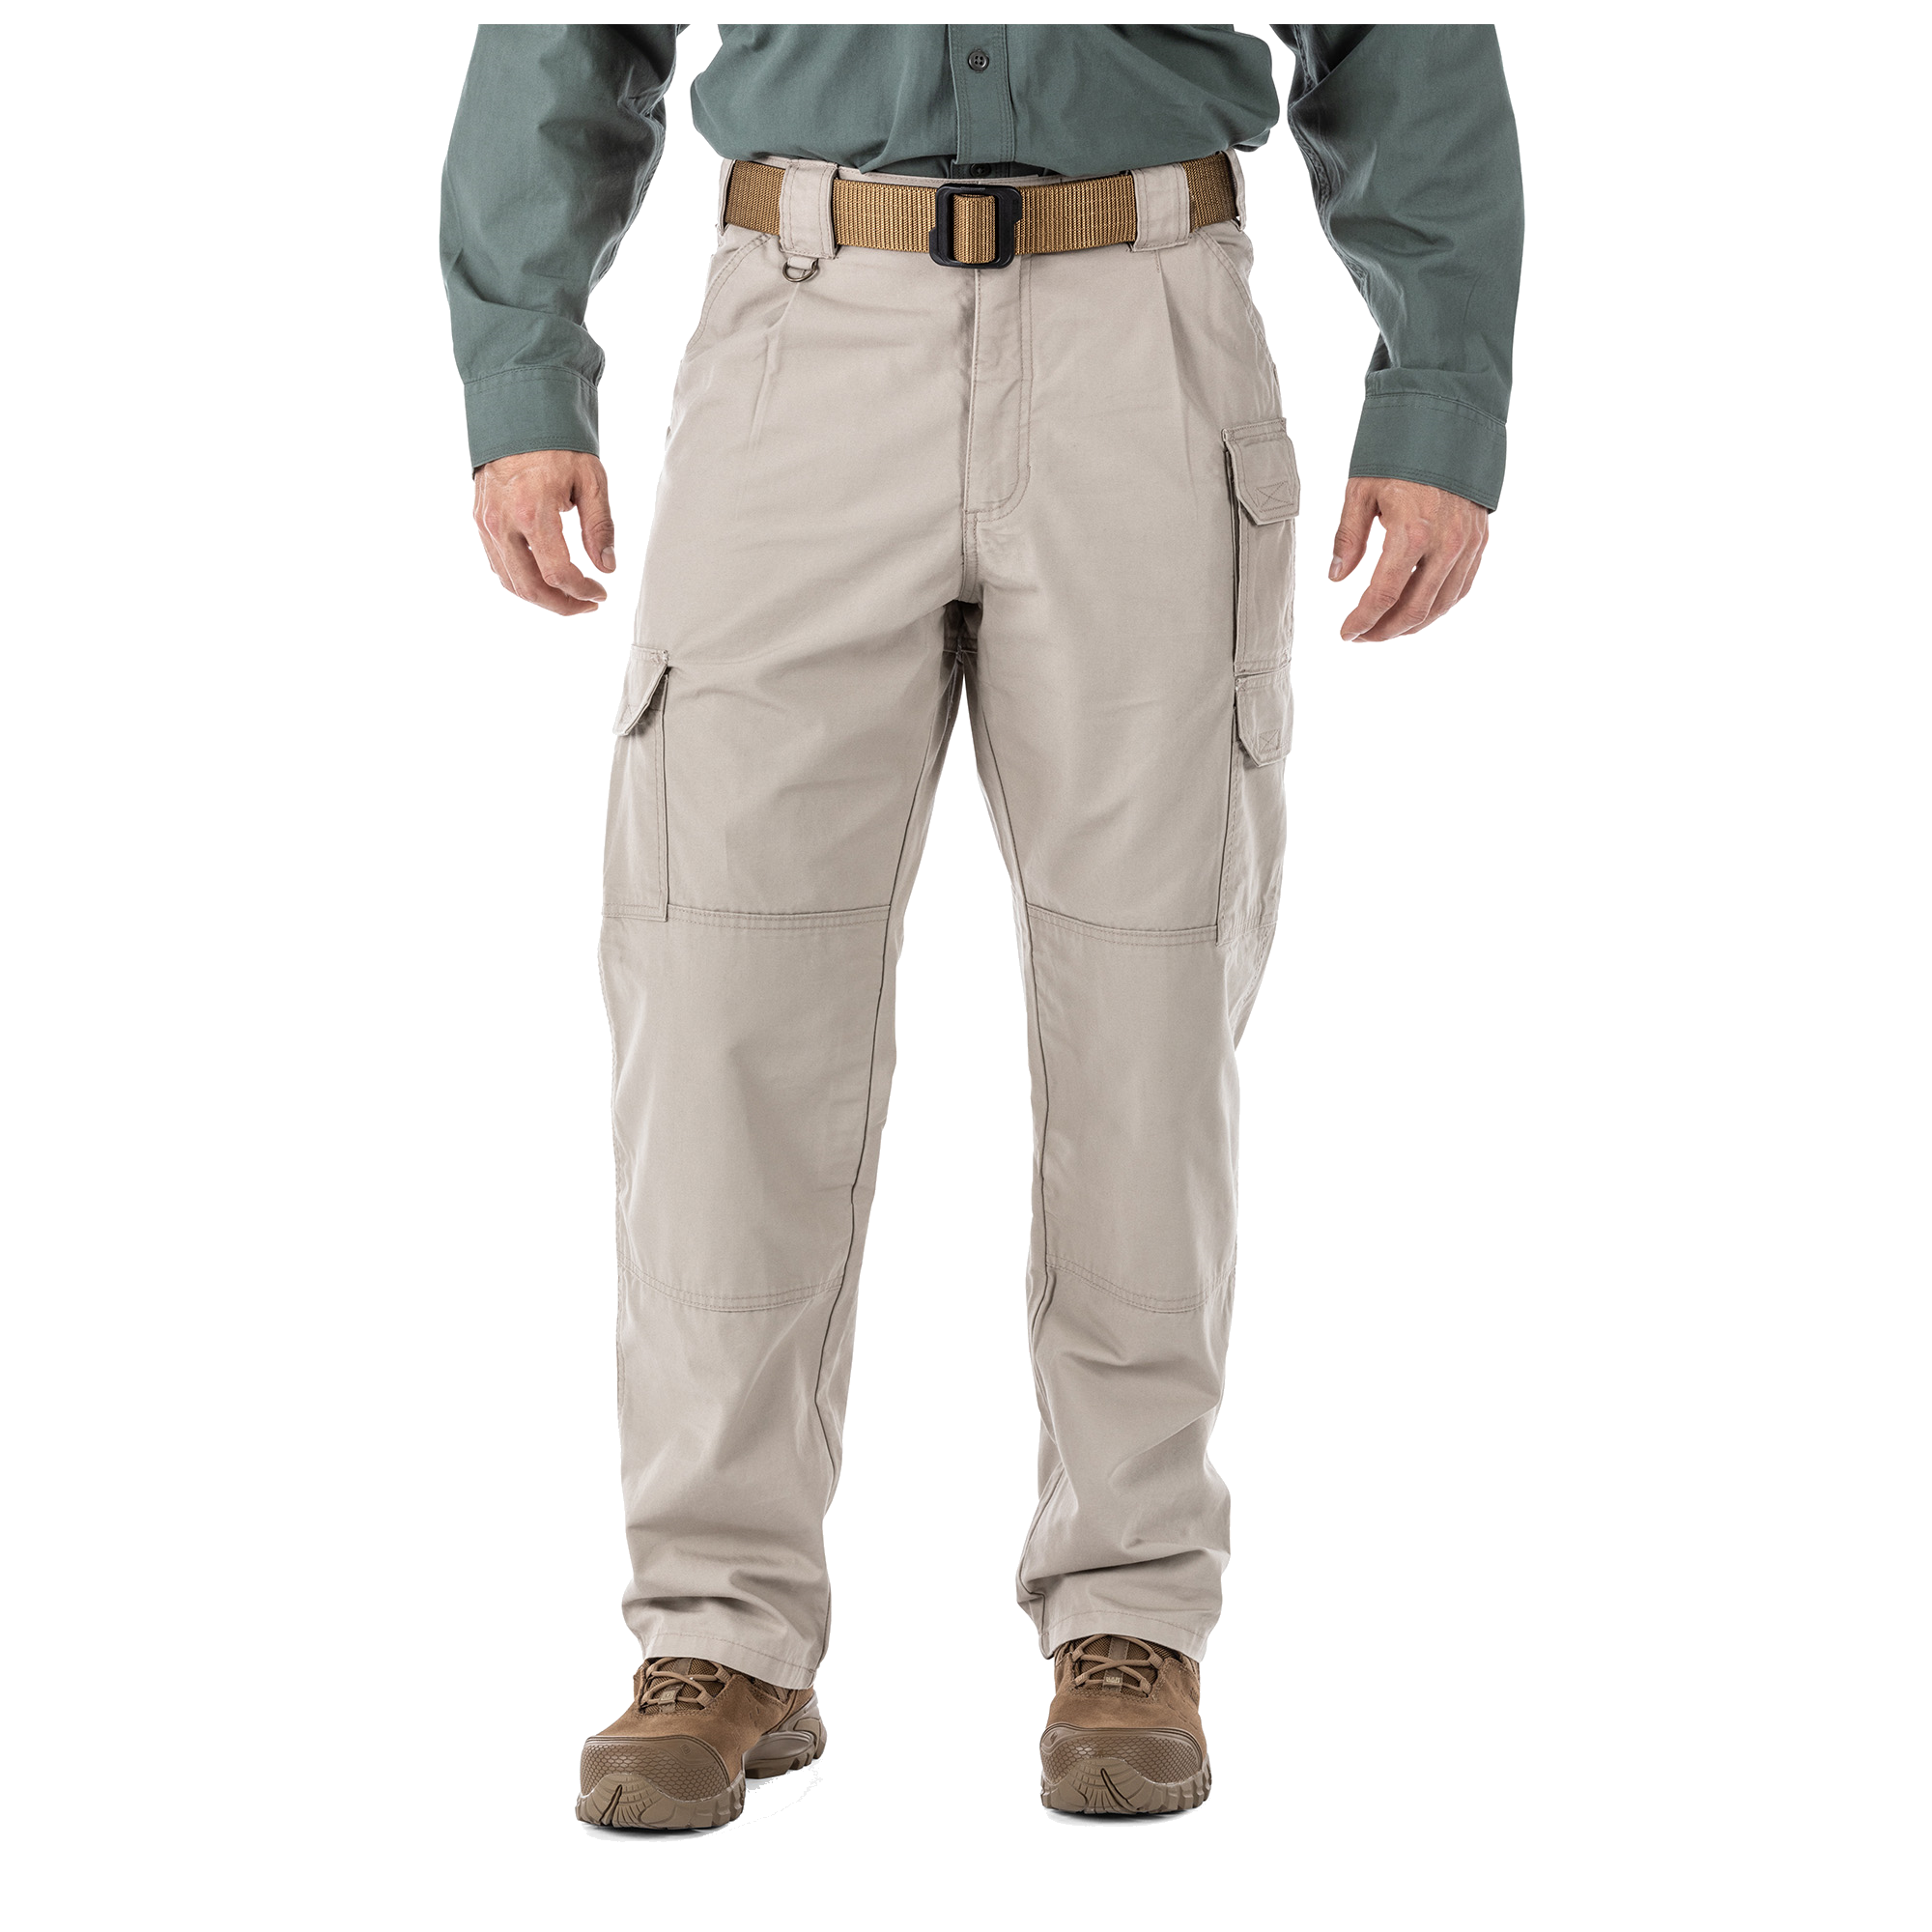 5.11 trousers